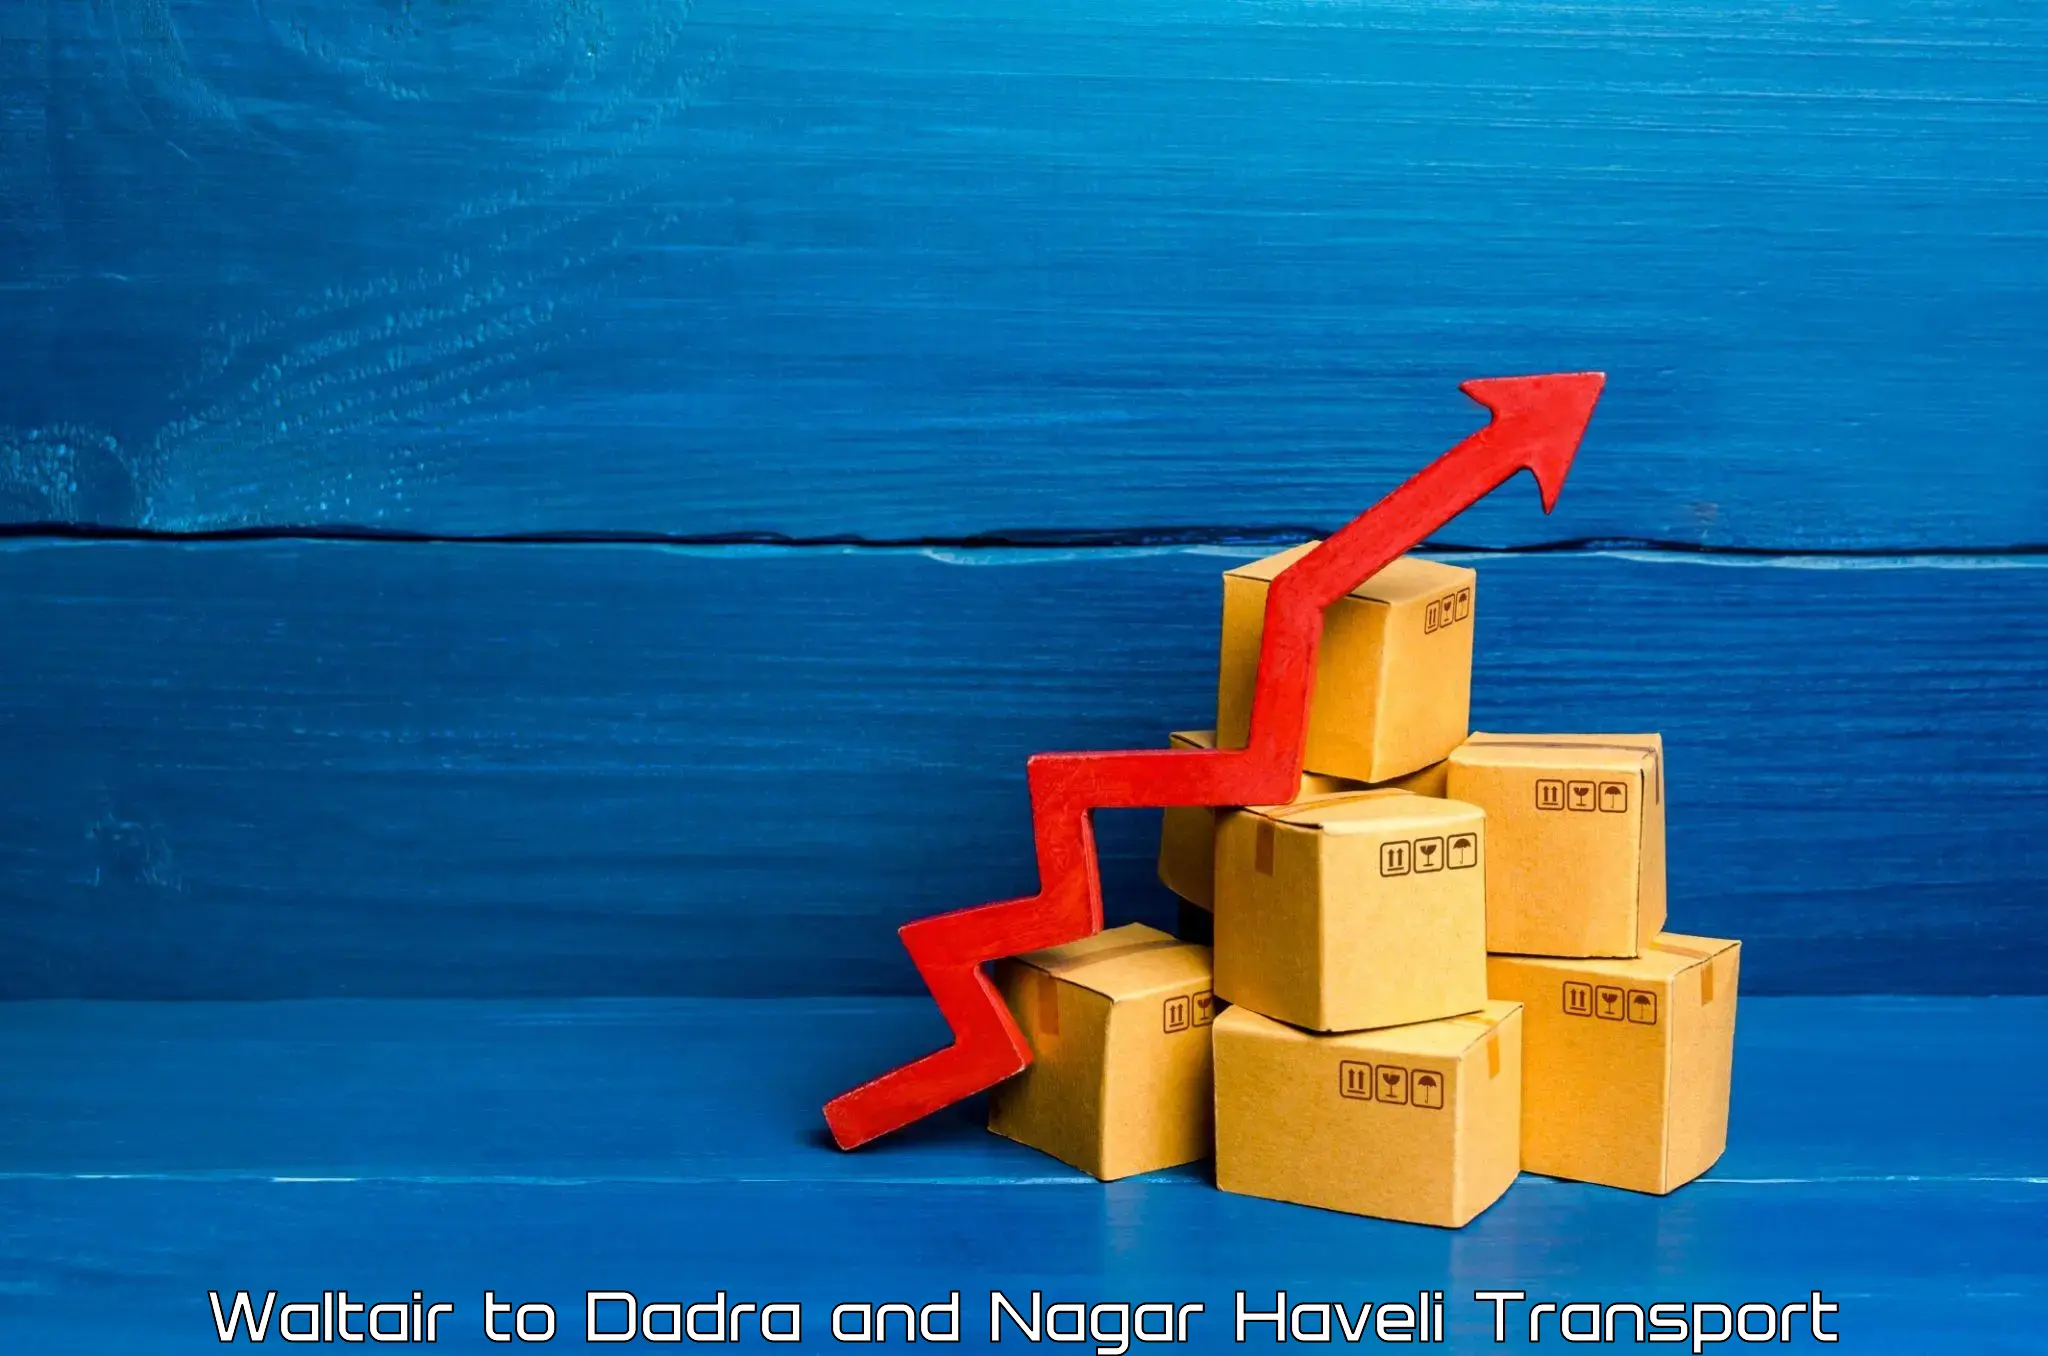 Cargo transport services Waltair to Dadra and Nagar Haveli